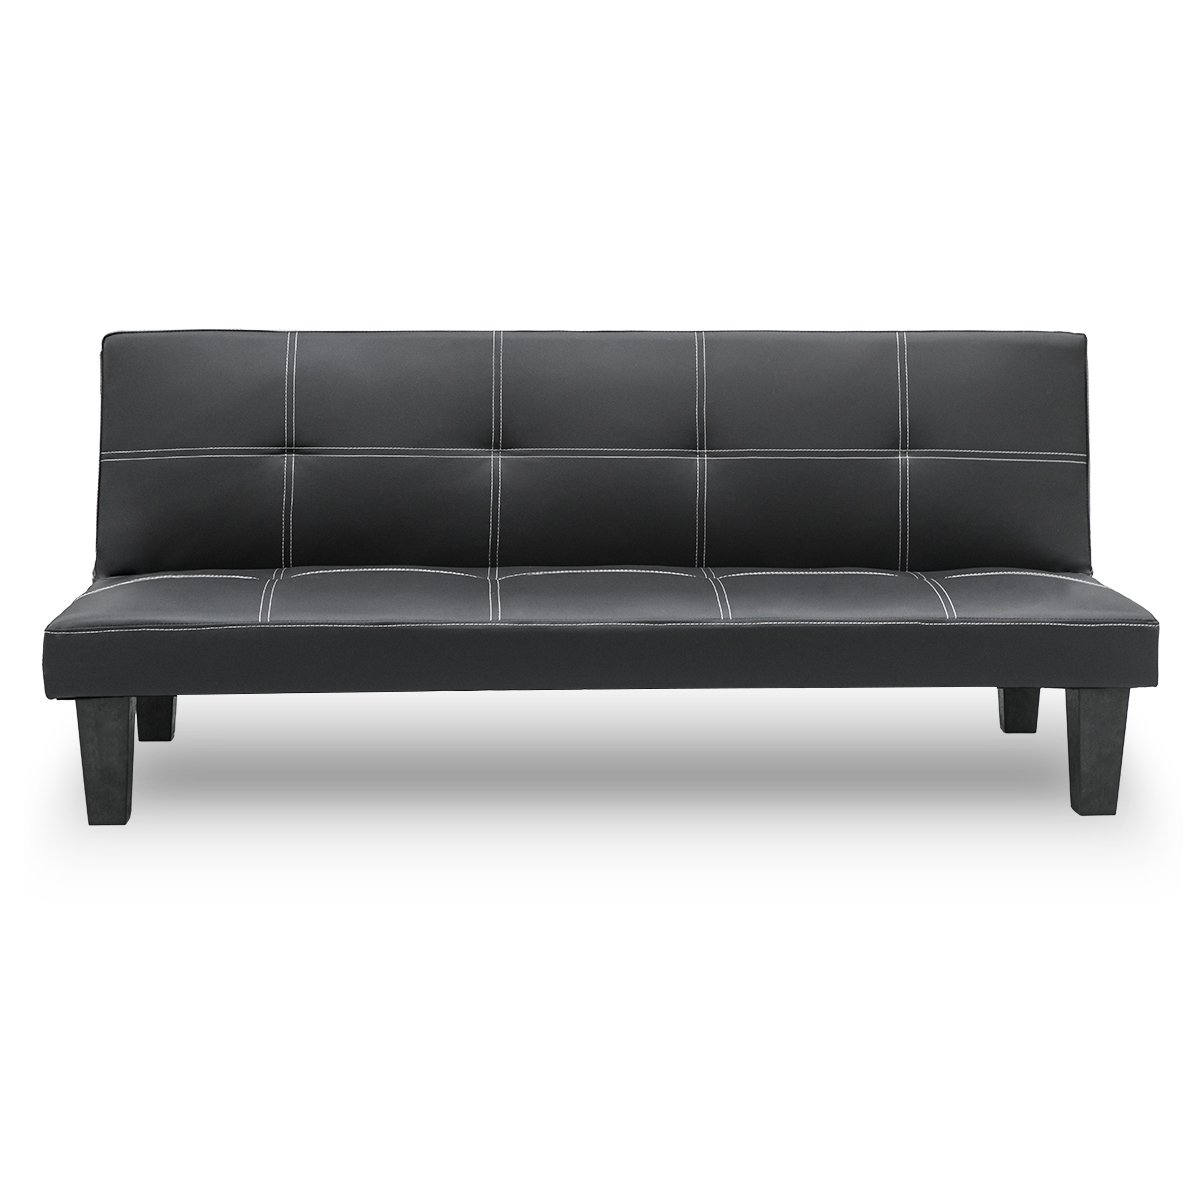 Sarantino 2 Seater Modular Faux Leather Fabric Sofa Bed Couch - Black 2